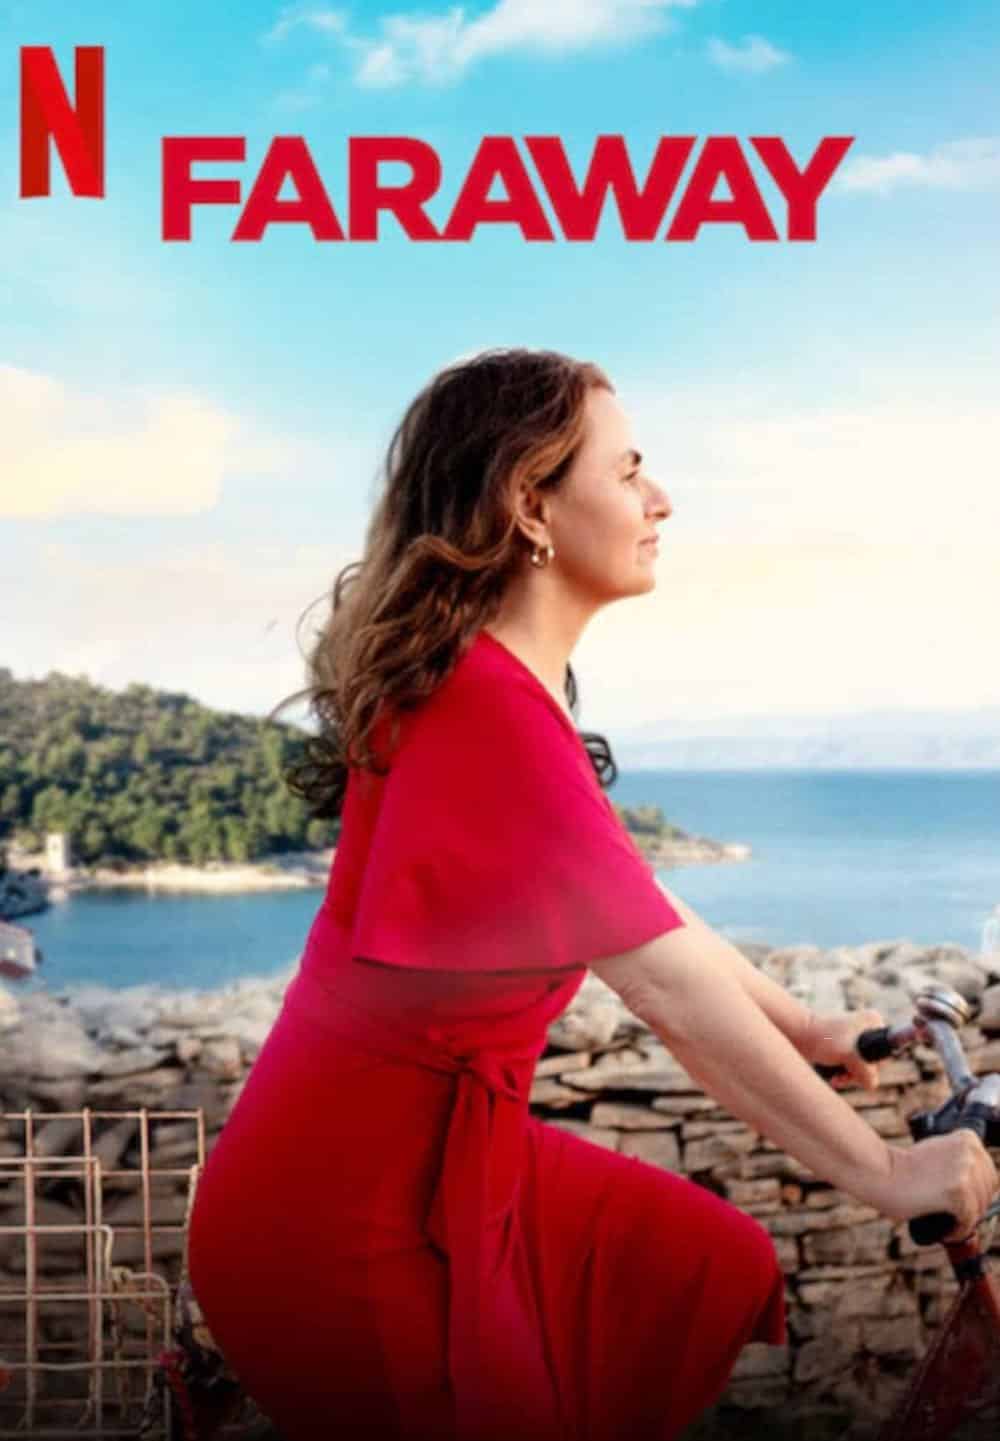 Naomi Krauss rides a bicycle on the poster for Faraway